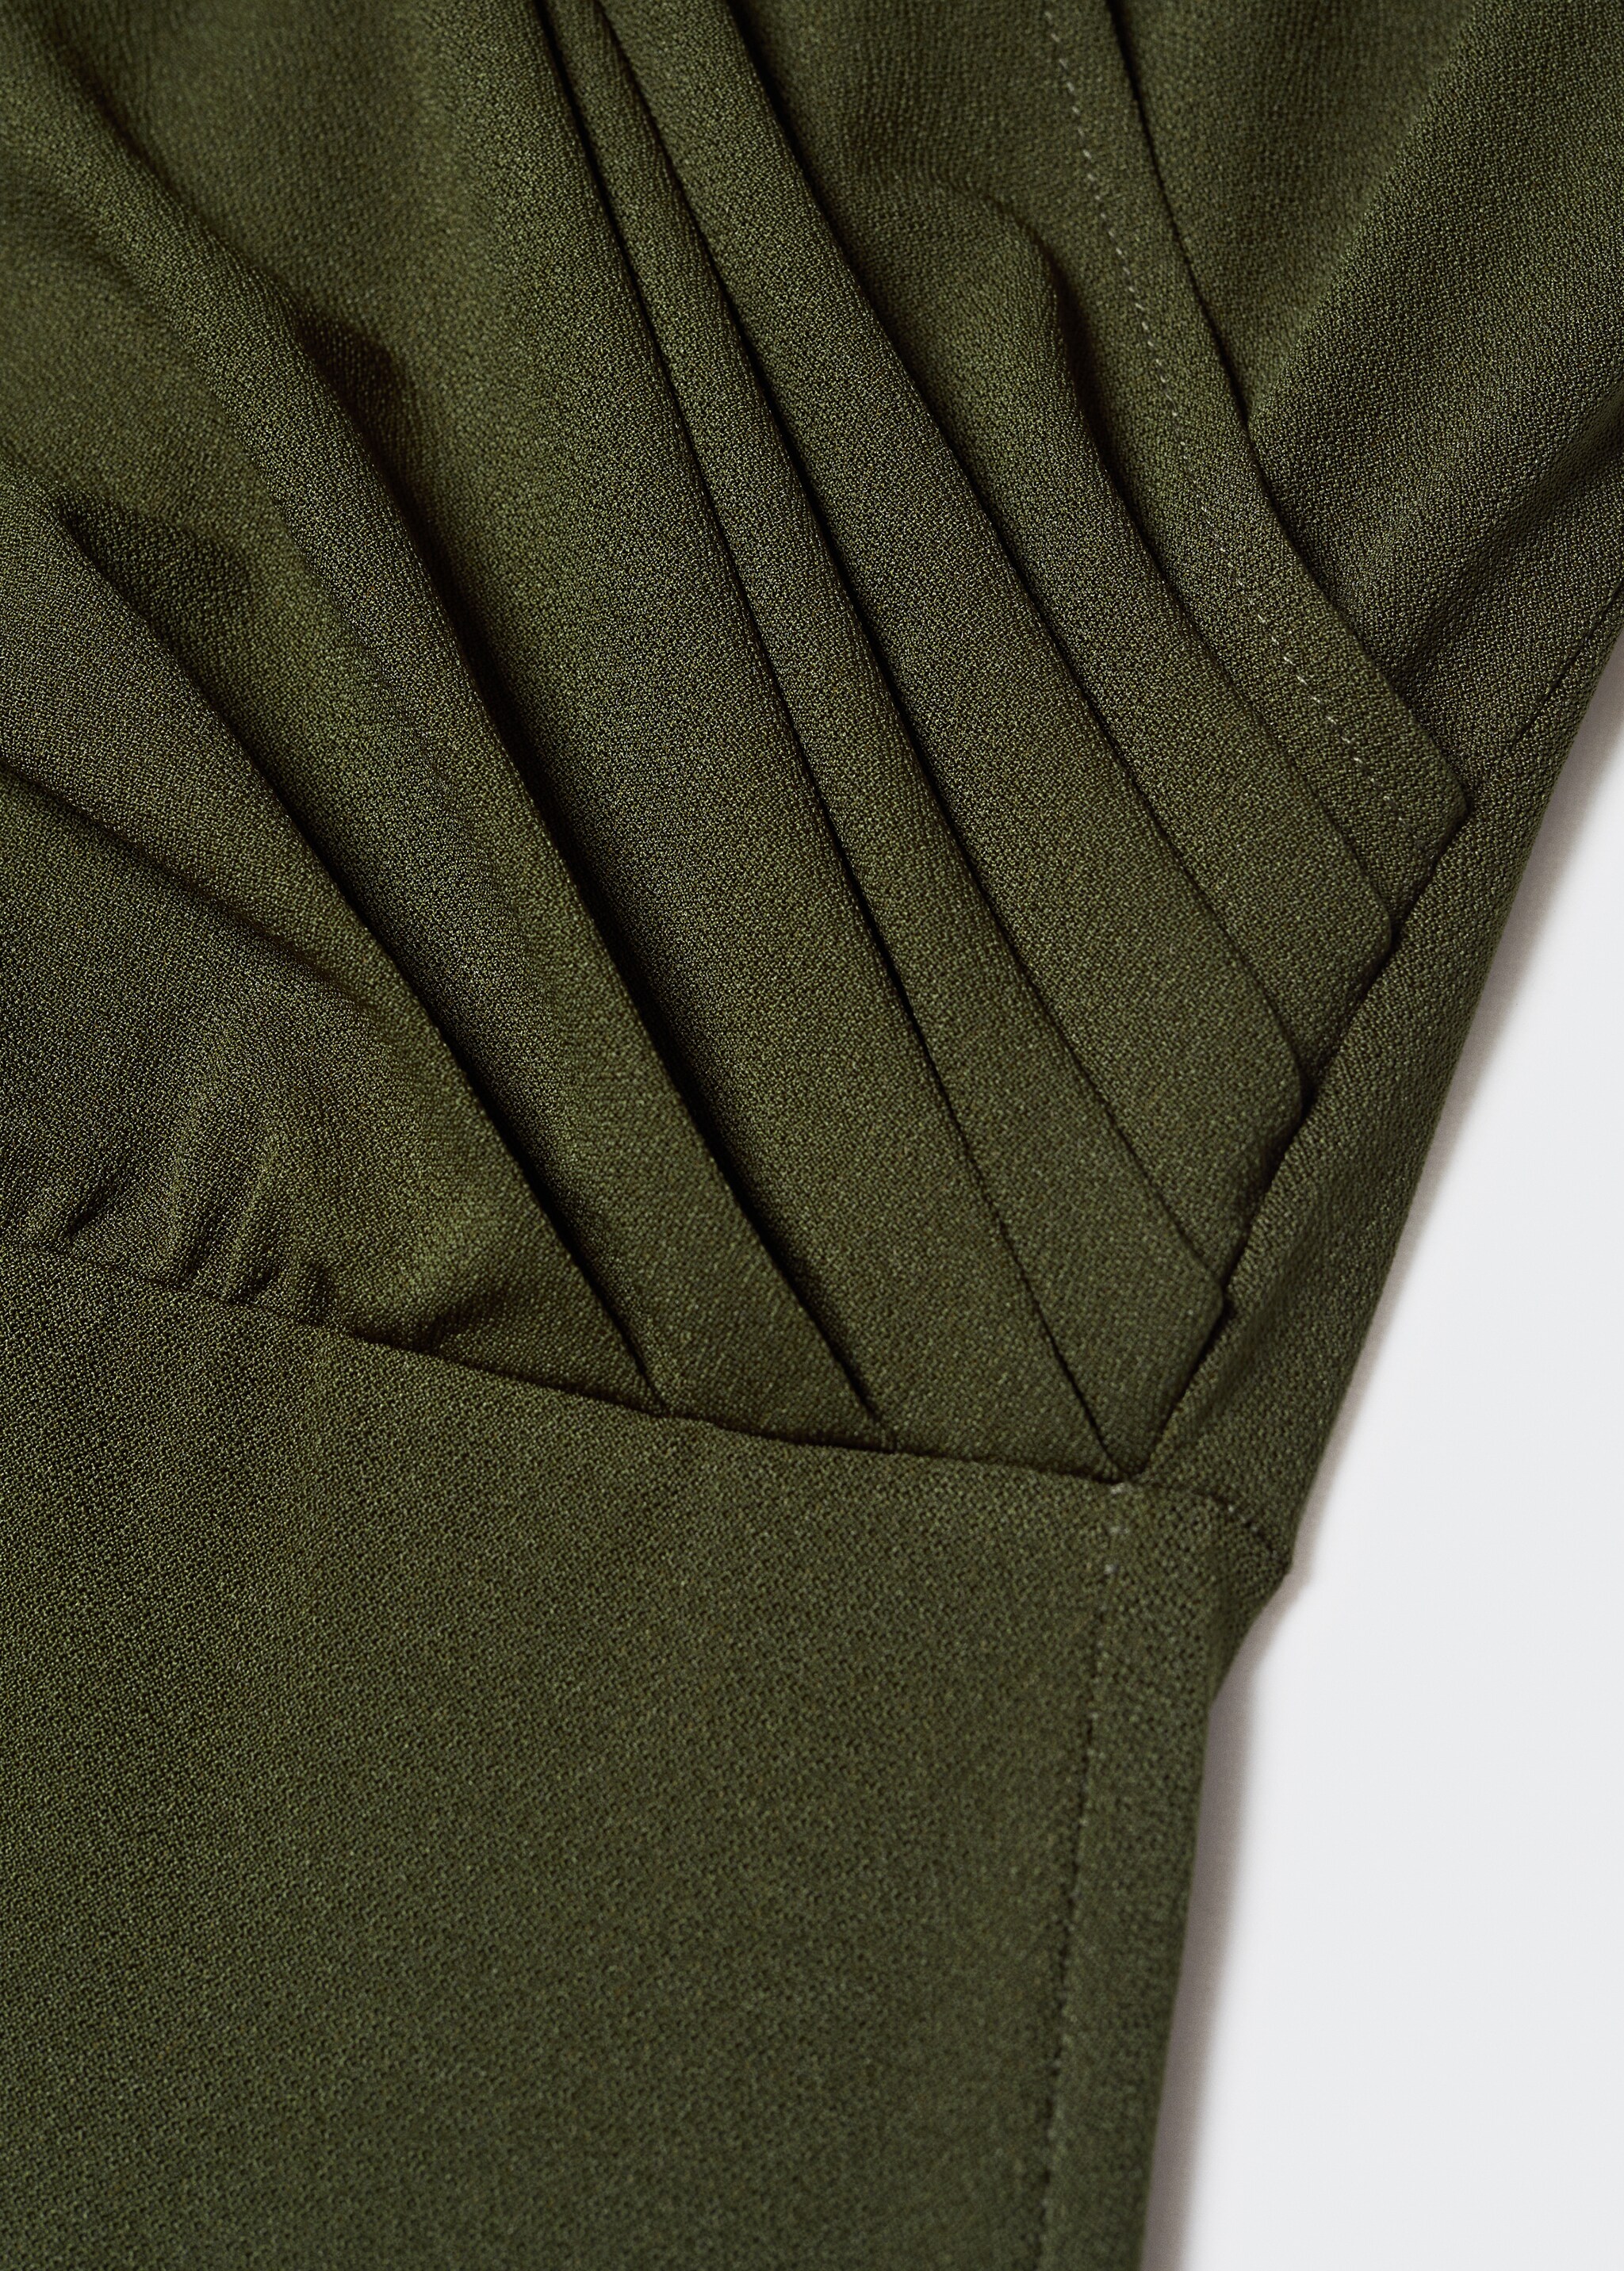 Hooded long dress - Details of the article 8